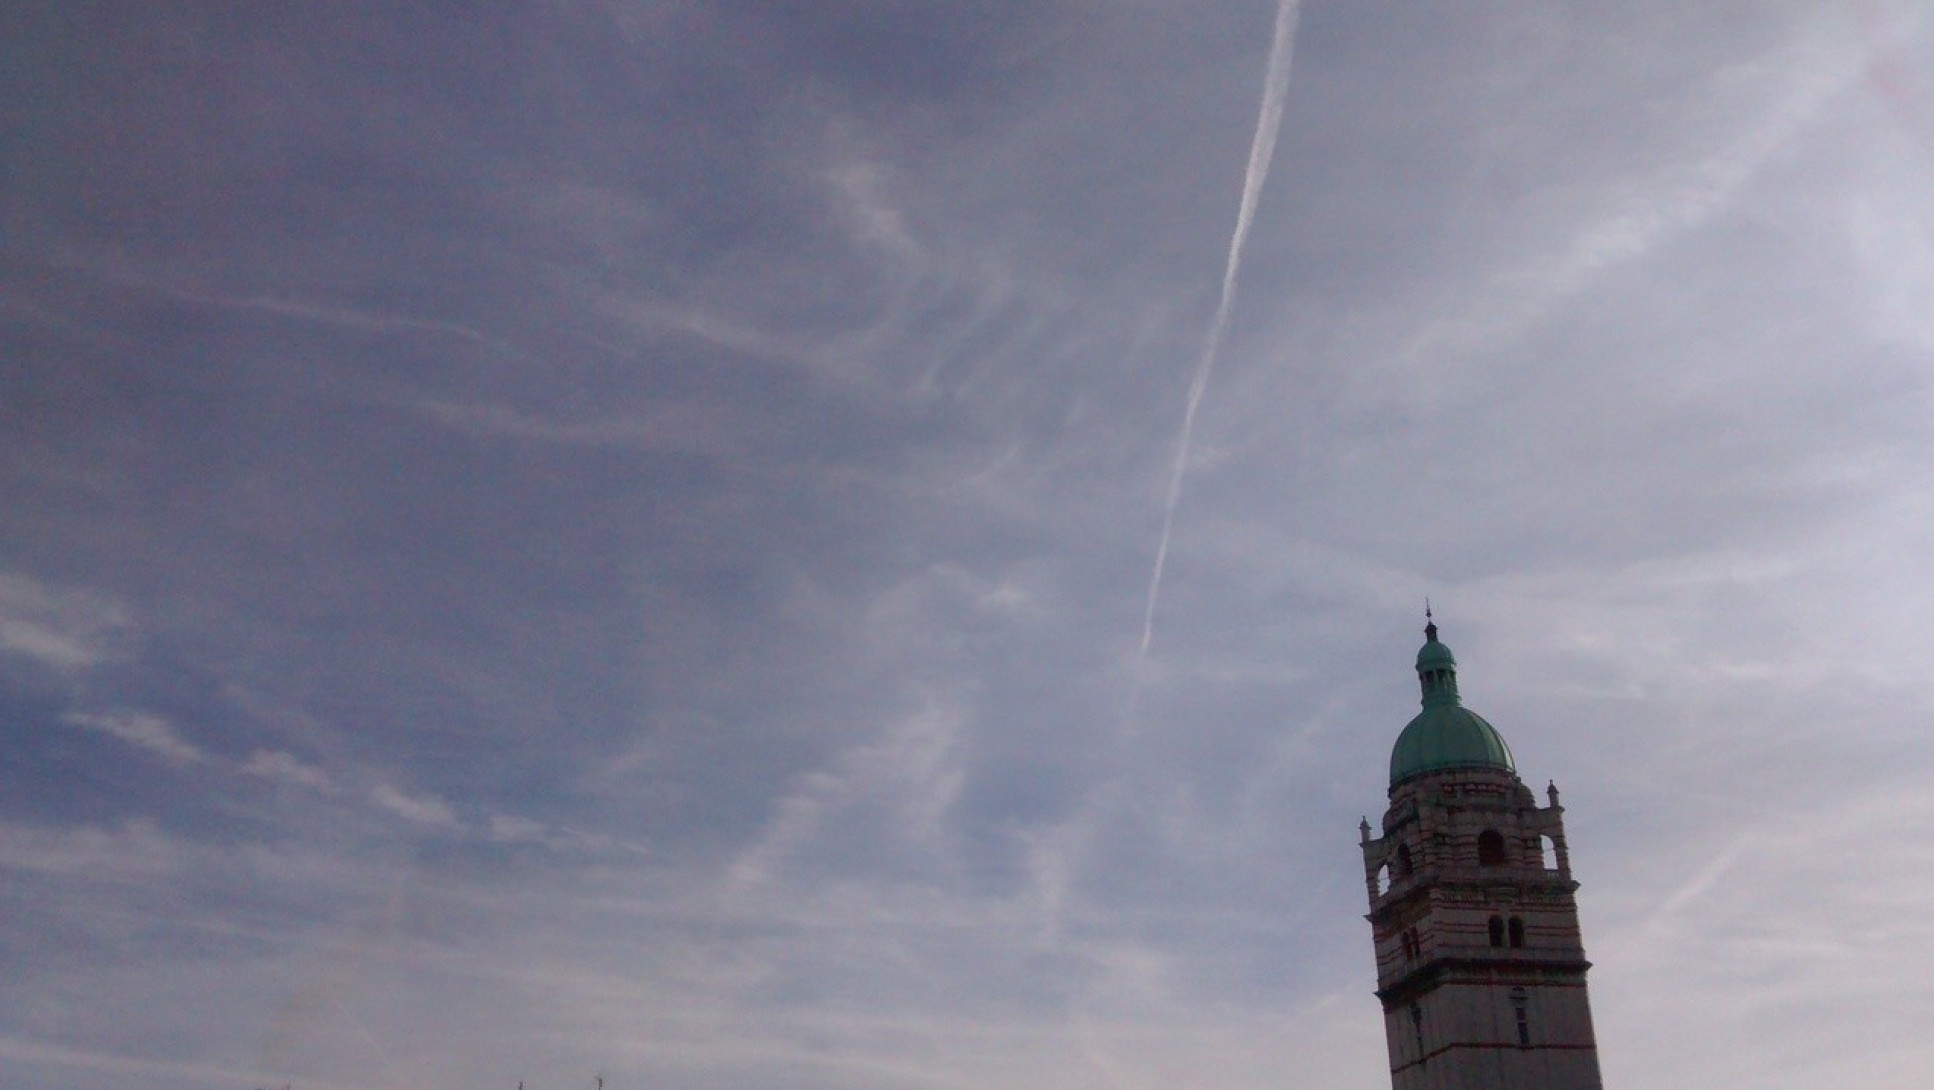 Aircraft contrails above Imperial College London